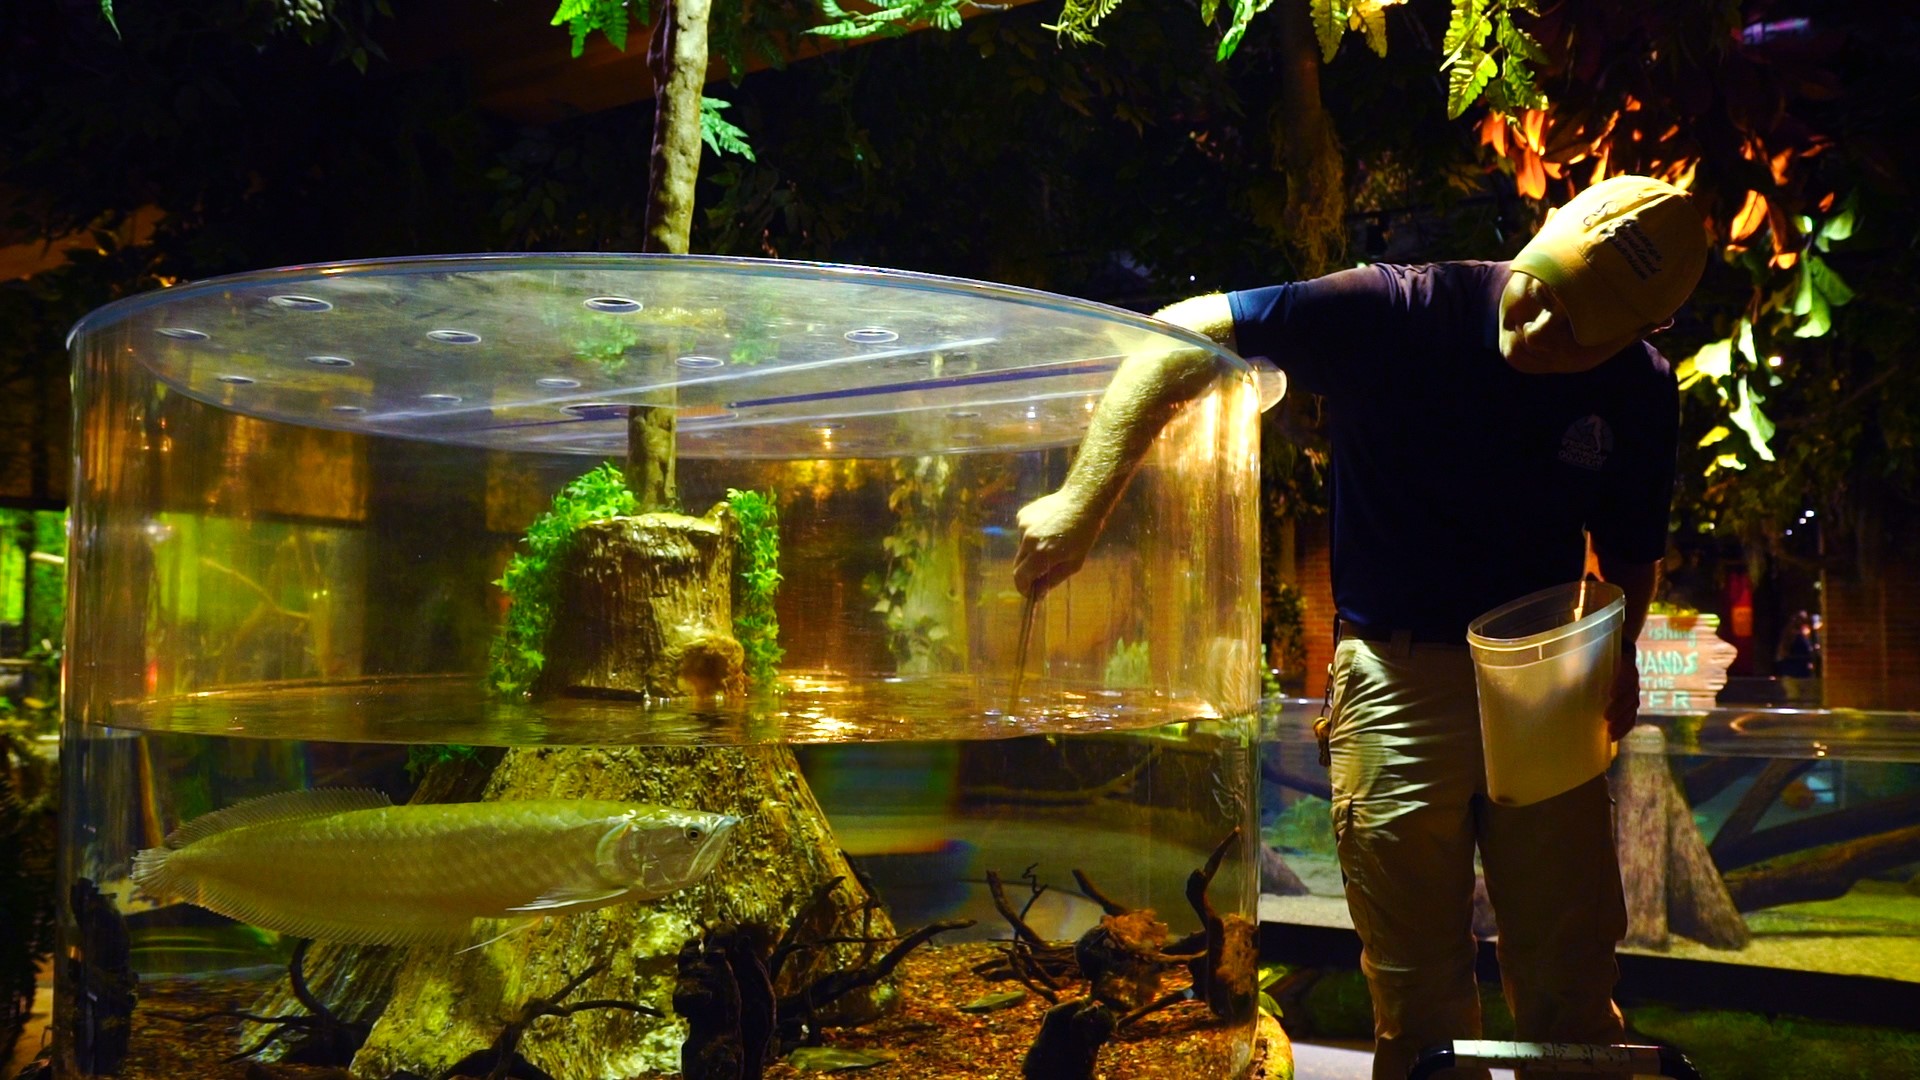 Hardworking Cleveland is a WKYC digital web-series about Clevelanders hard at work. This story is  with Aquarist Brenton Maille at the Cleveland Aquarium. He shows us what its like inside the tank.